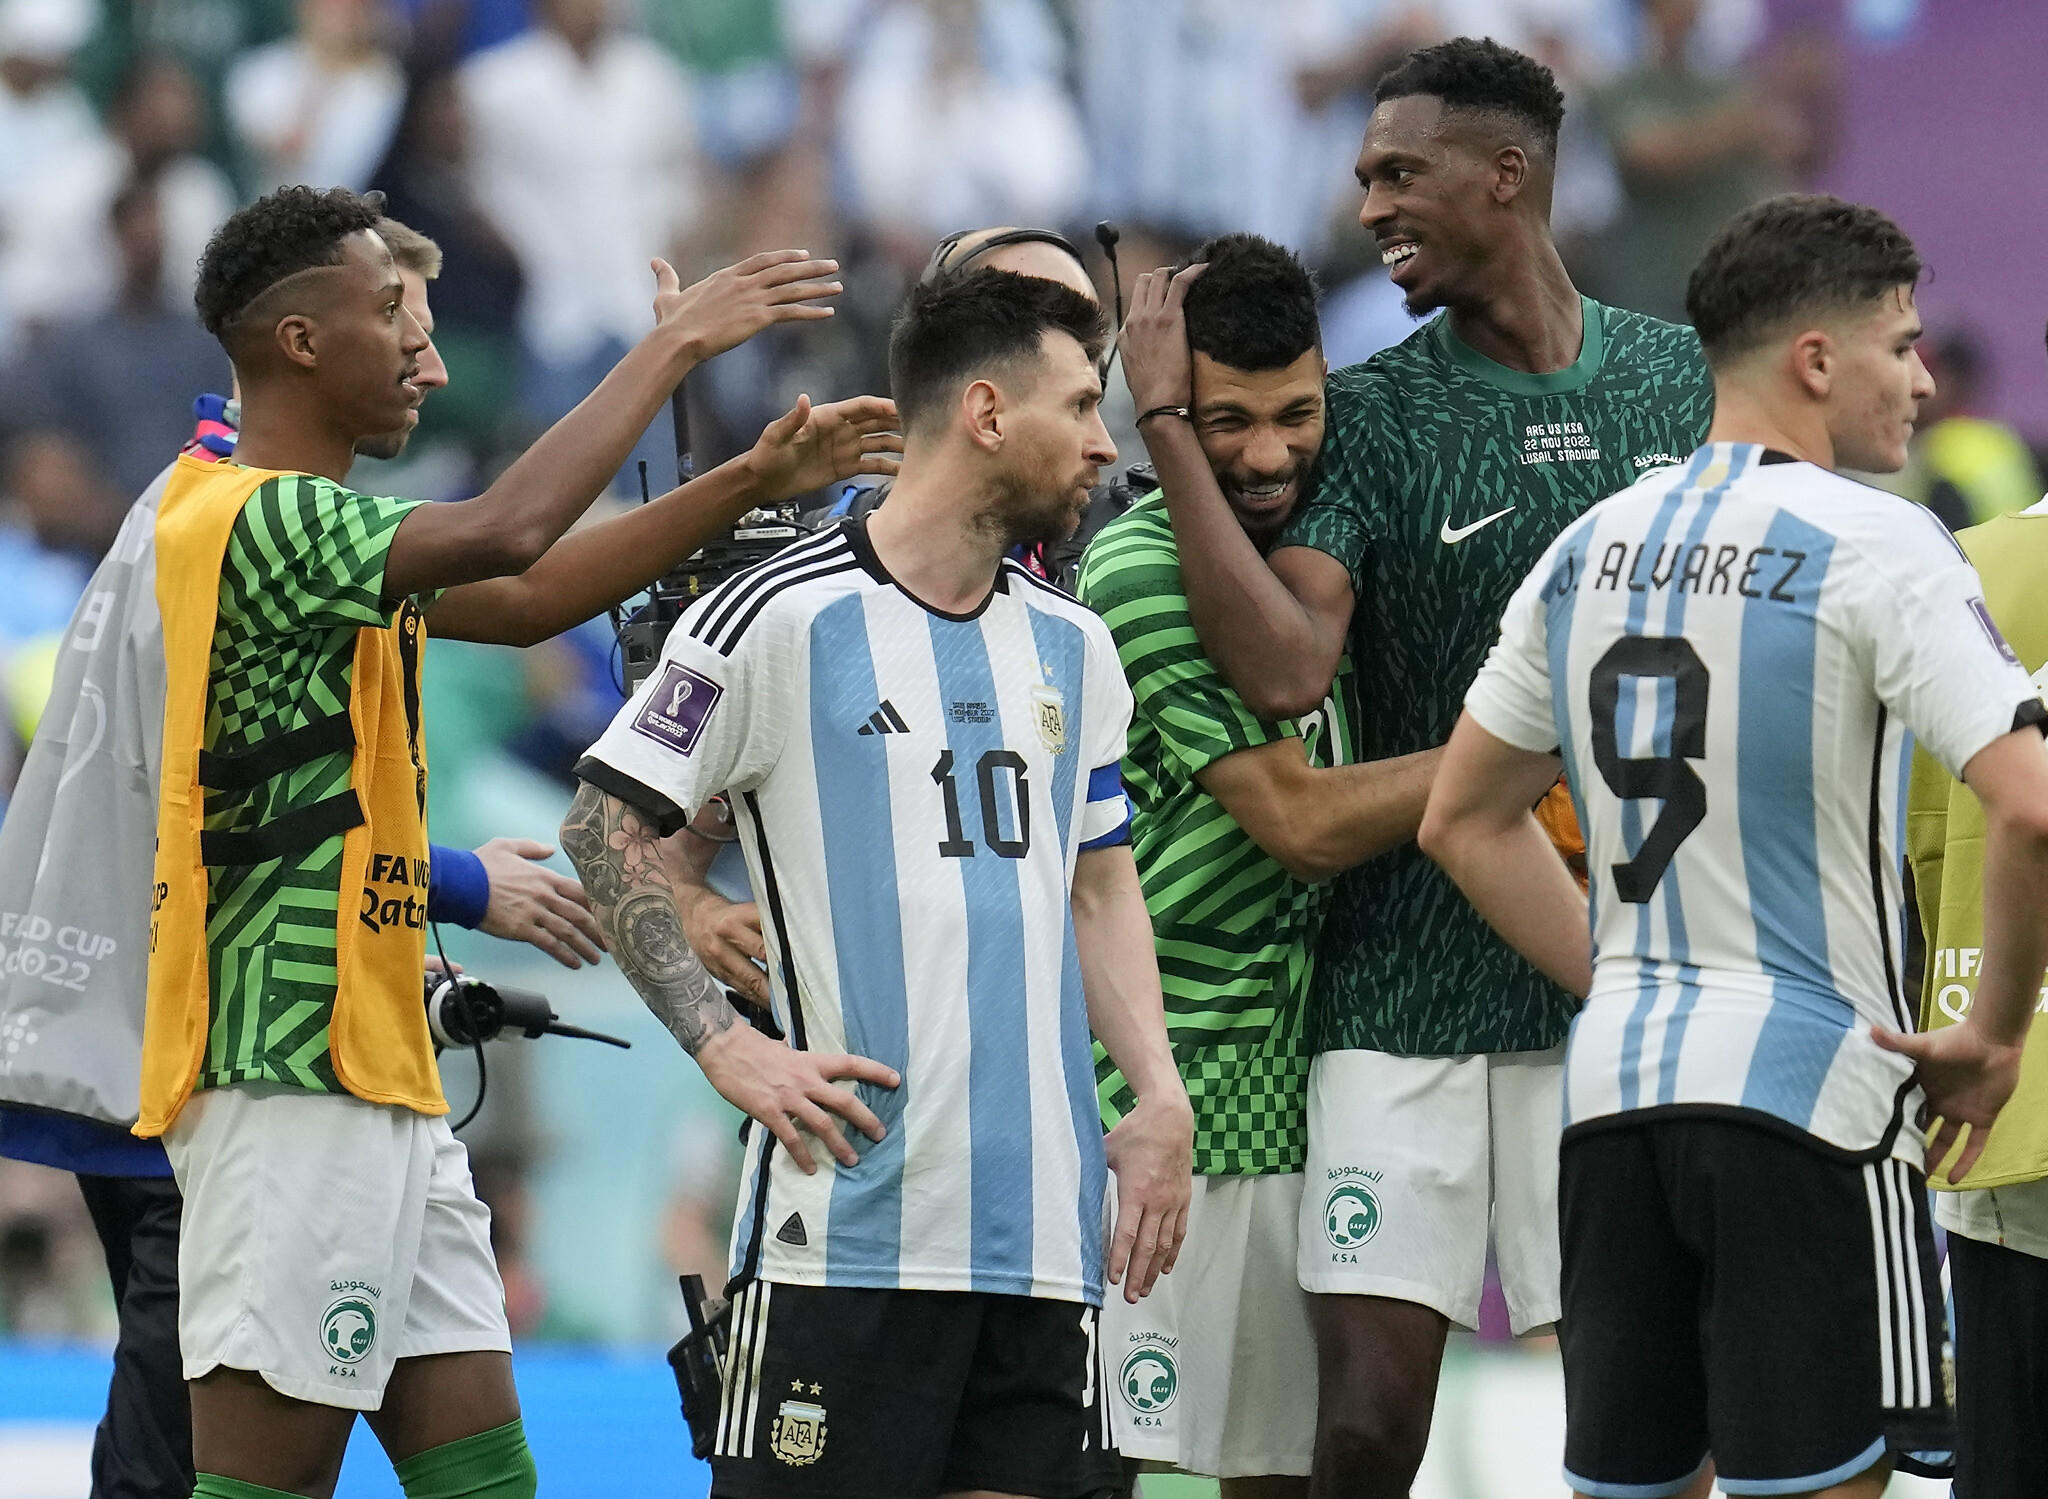 Saudi Arabia downs Messis Argentina in historic World Cup upset The Times of Israel